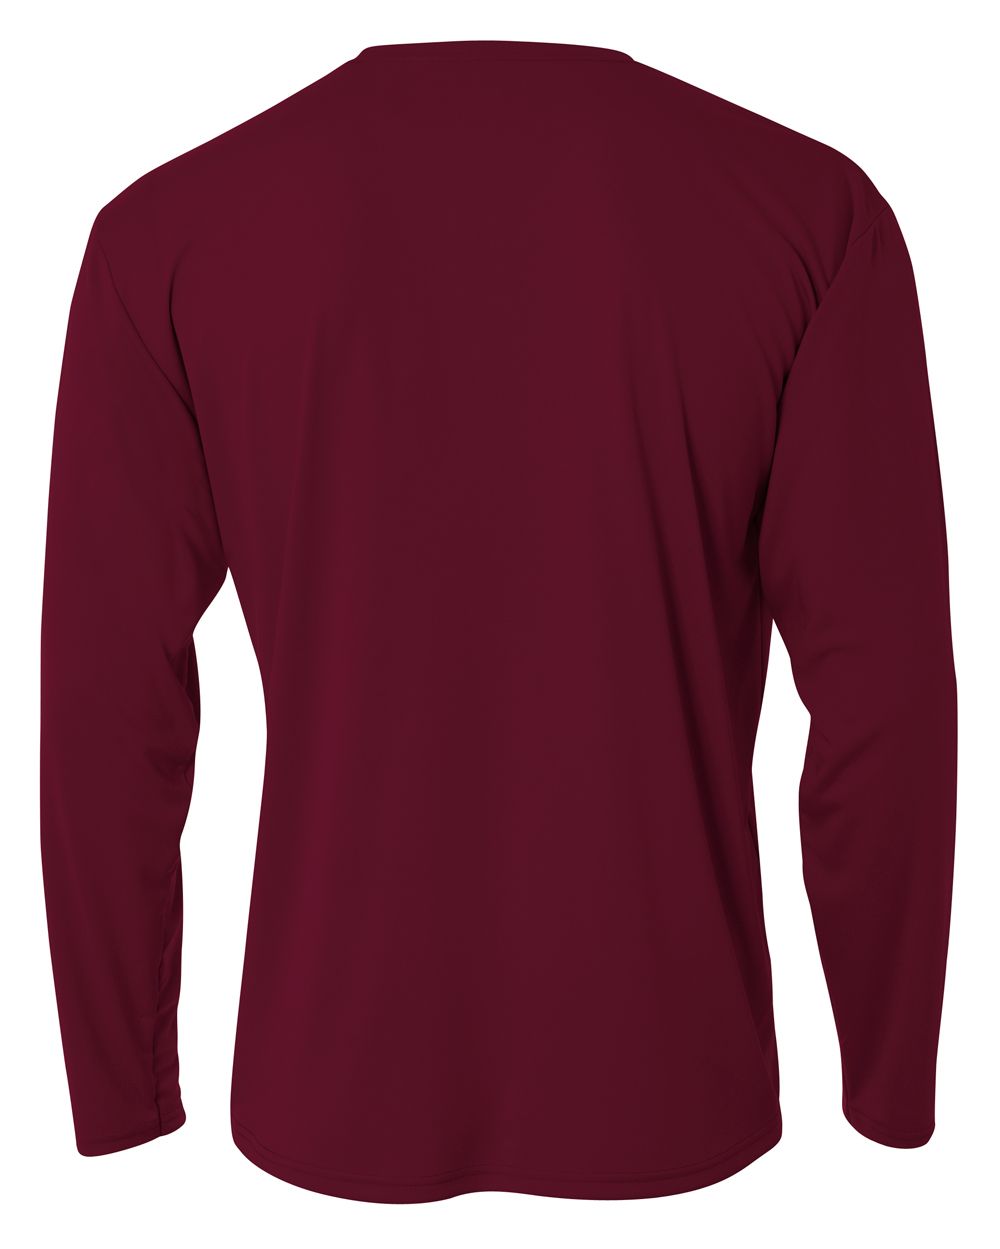 A4 N3165 Mens Cooling Performance Long Sleeve T-Shirt More Colors